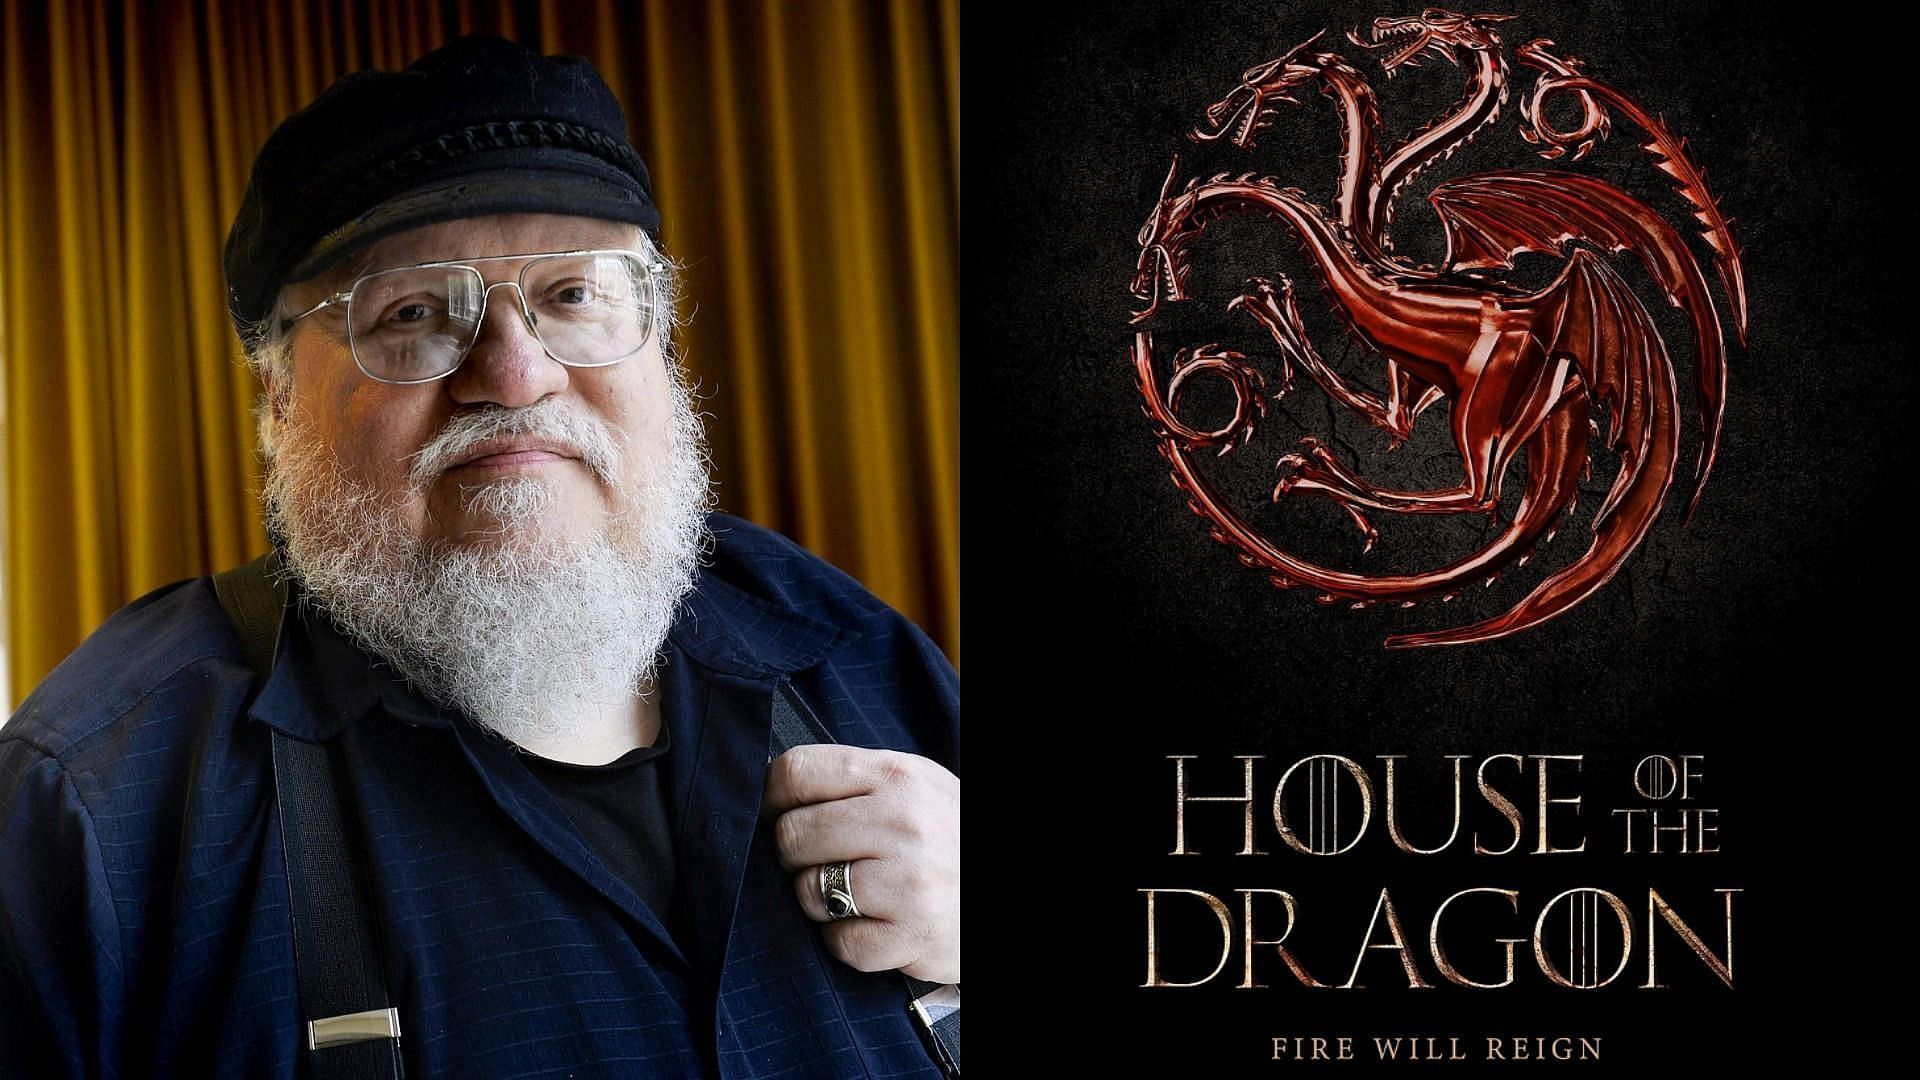 George R. R. Martin and House of the Dragon (Images via Shutterstock and HBO)